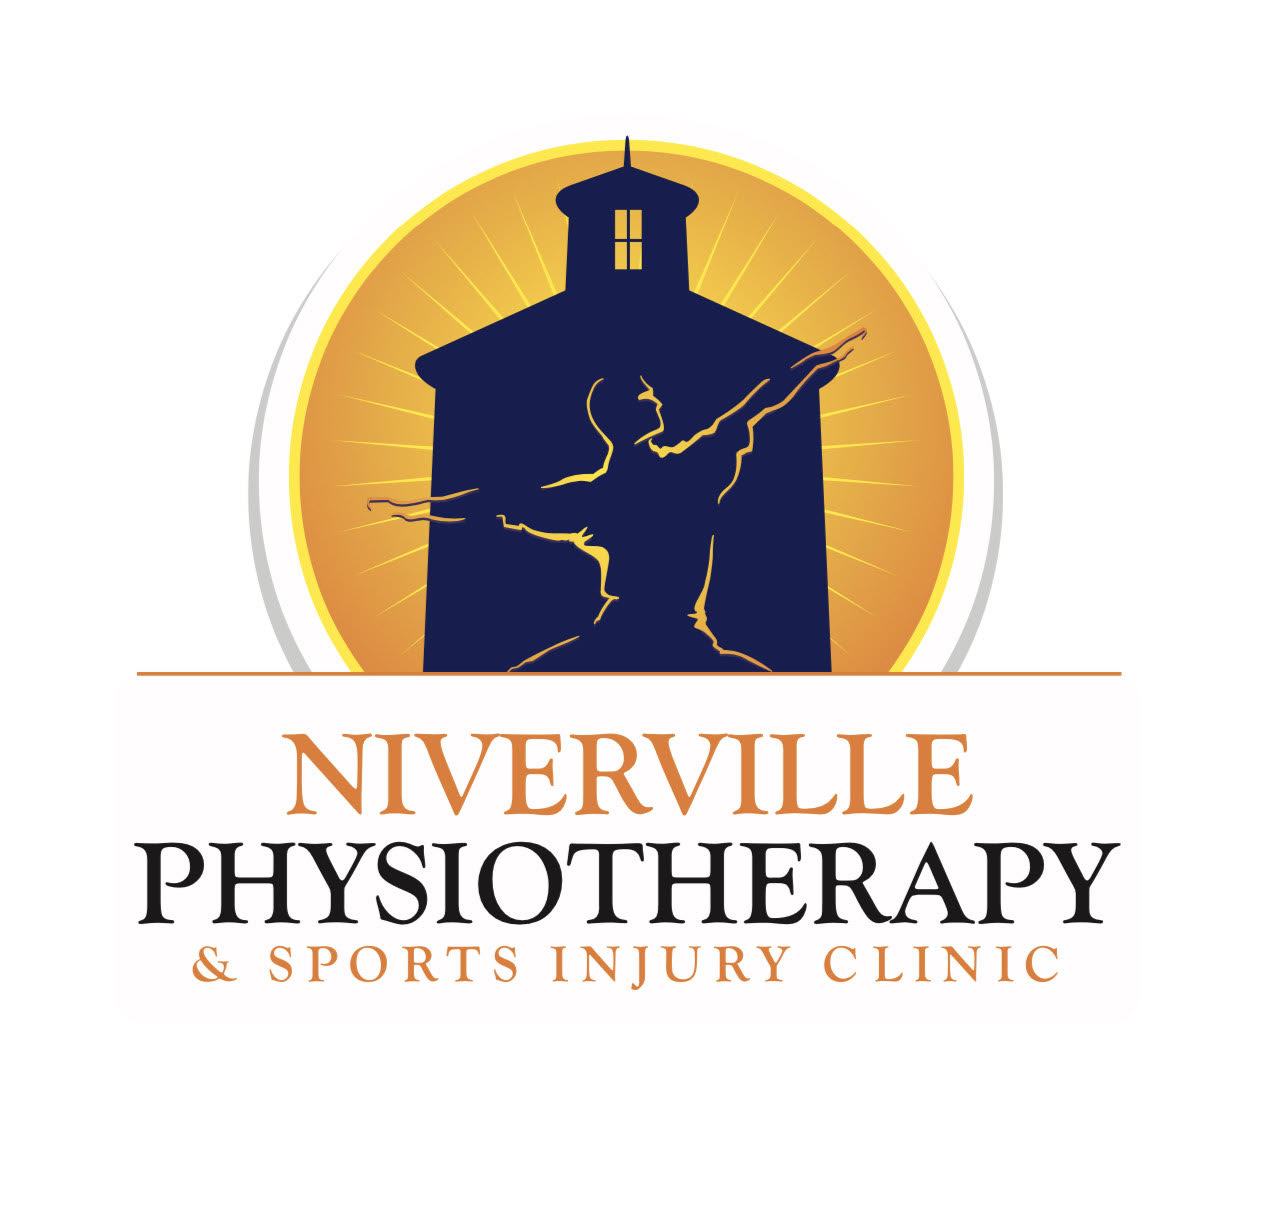 Niverville Physiotherapy